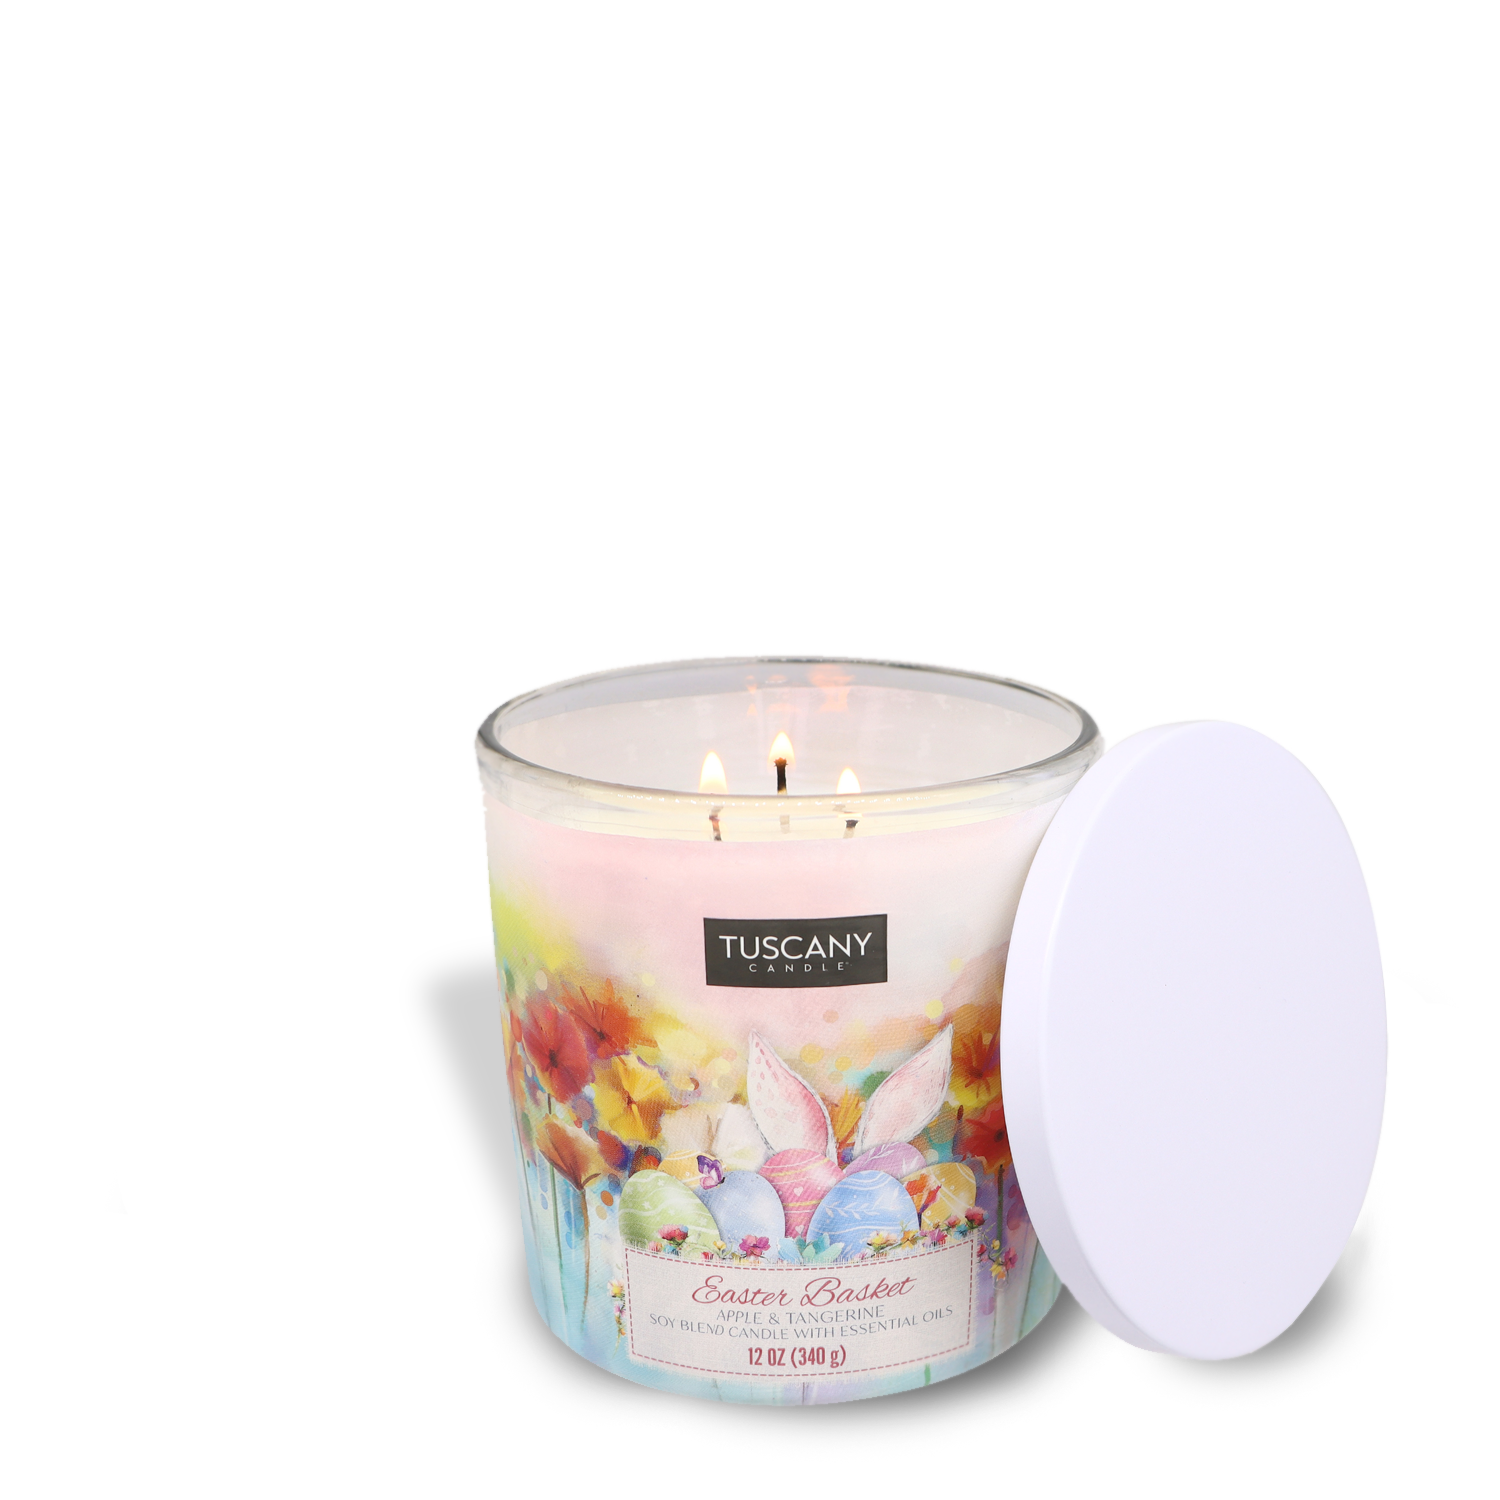 A Easter Basket Long-Lasting Scented Jar Candle (12 oz) with a white lid and flowers on it, perfect as an Easter gift or for placing in an Easter basket, from Tuscany Candle® SEASONAL.